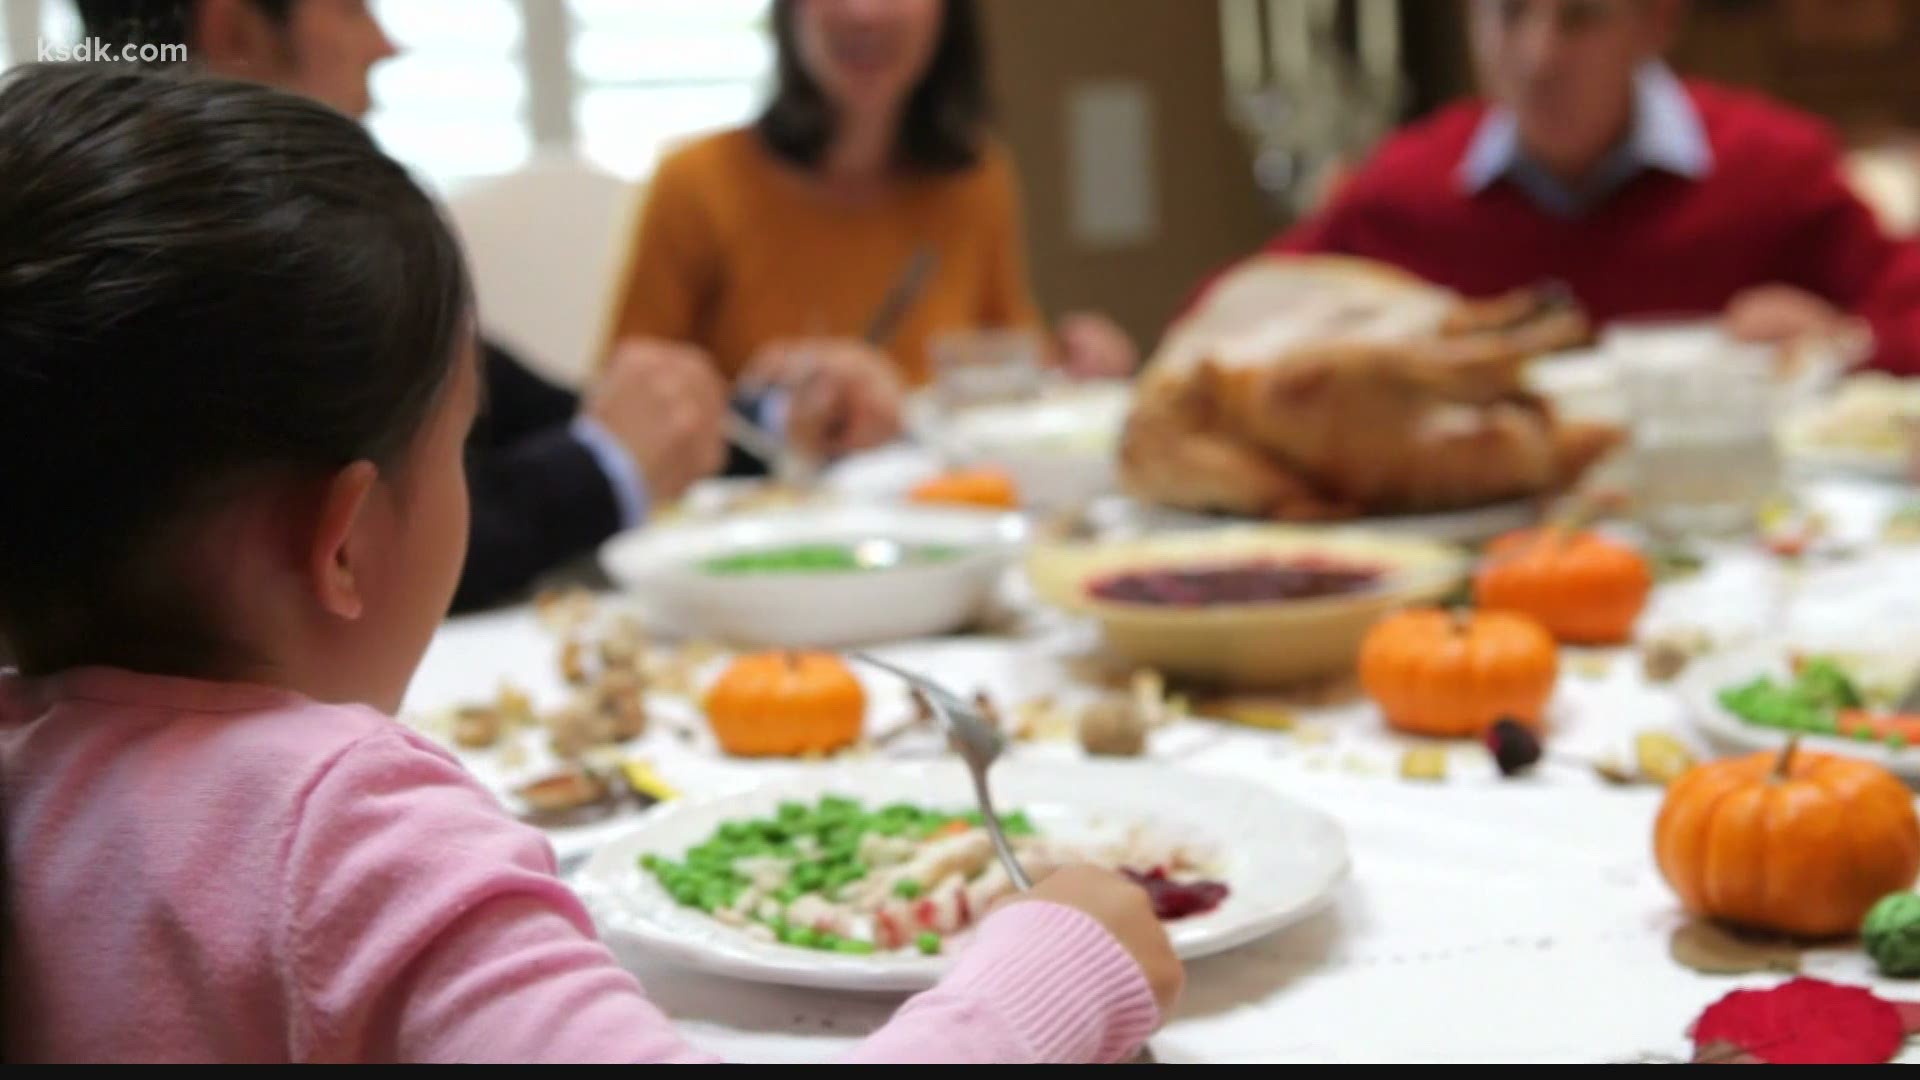 5 On Your Side reporter Rhyan Henson spoke to an expert about keeping Thanksgiving virus-free.